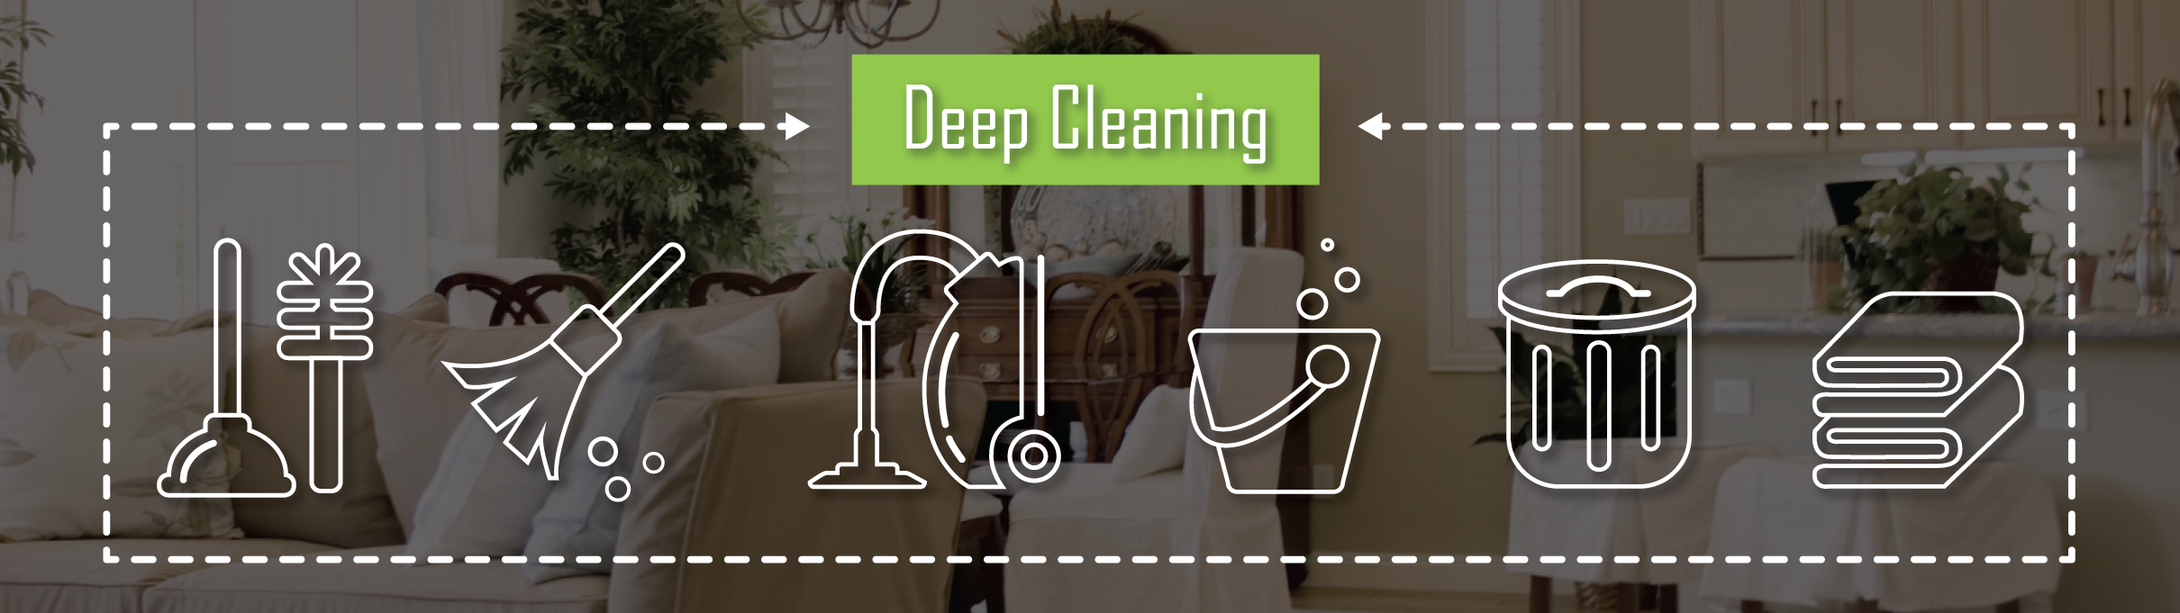 Spruce It Services Deep Cleaning